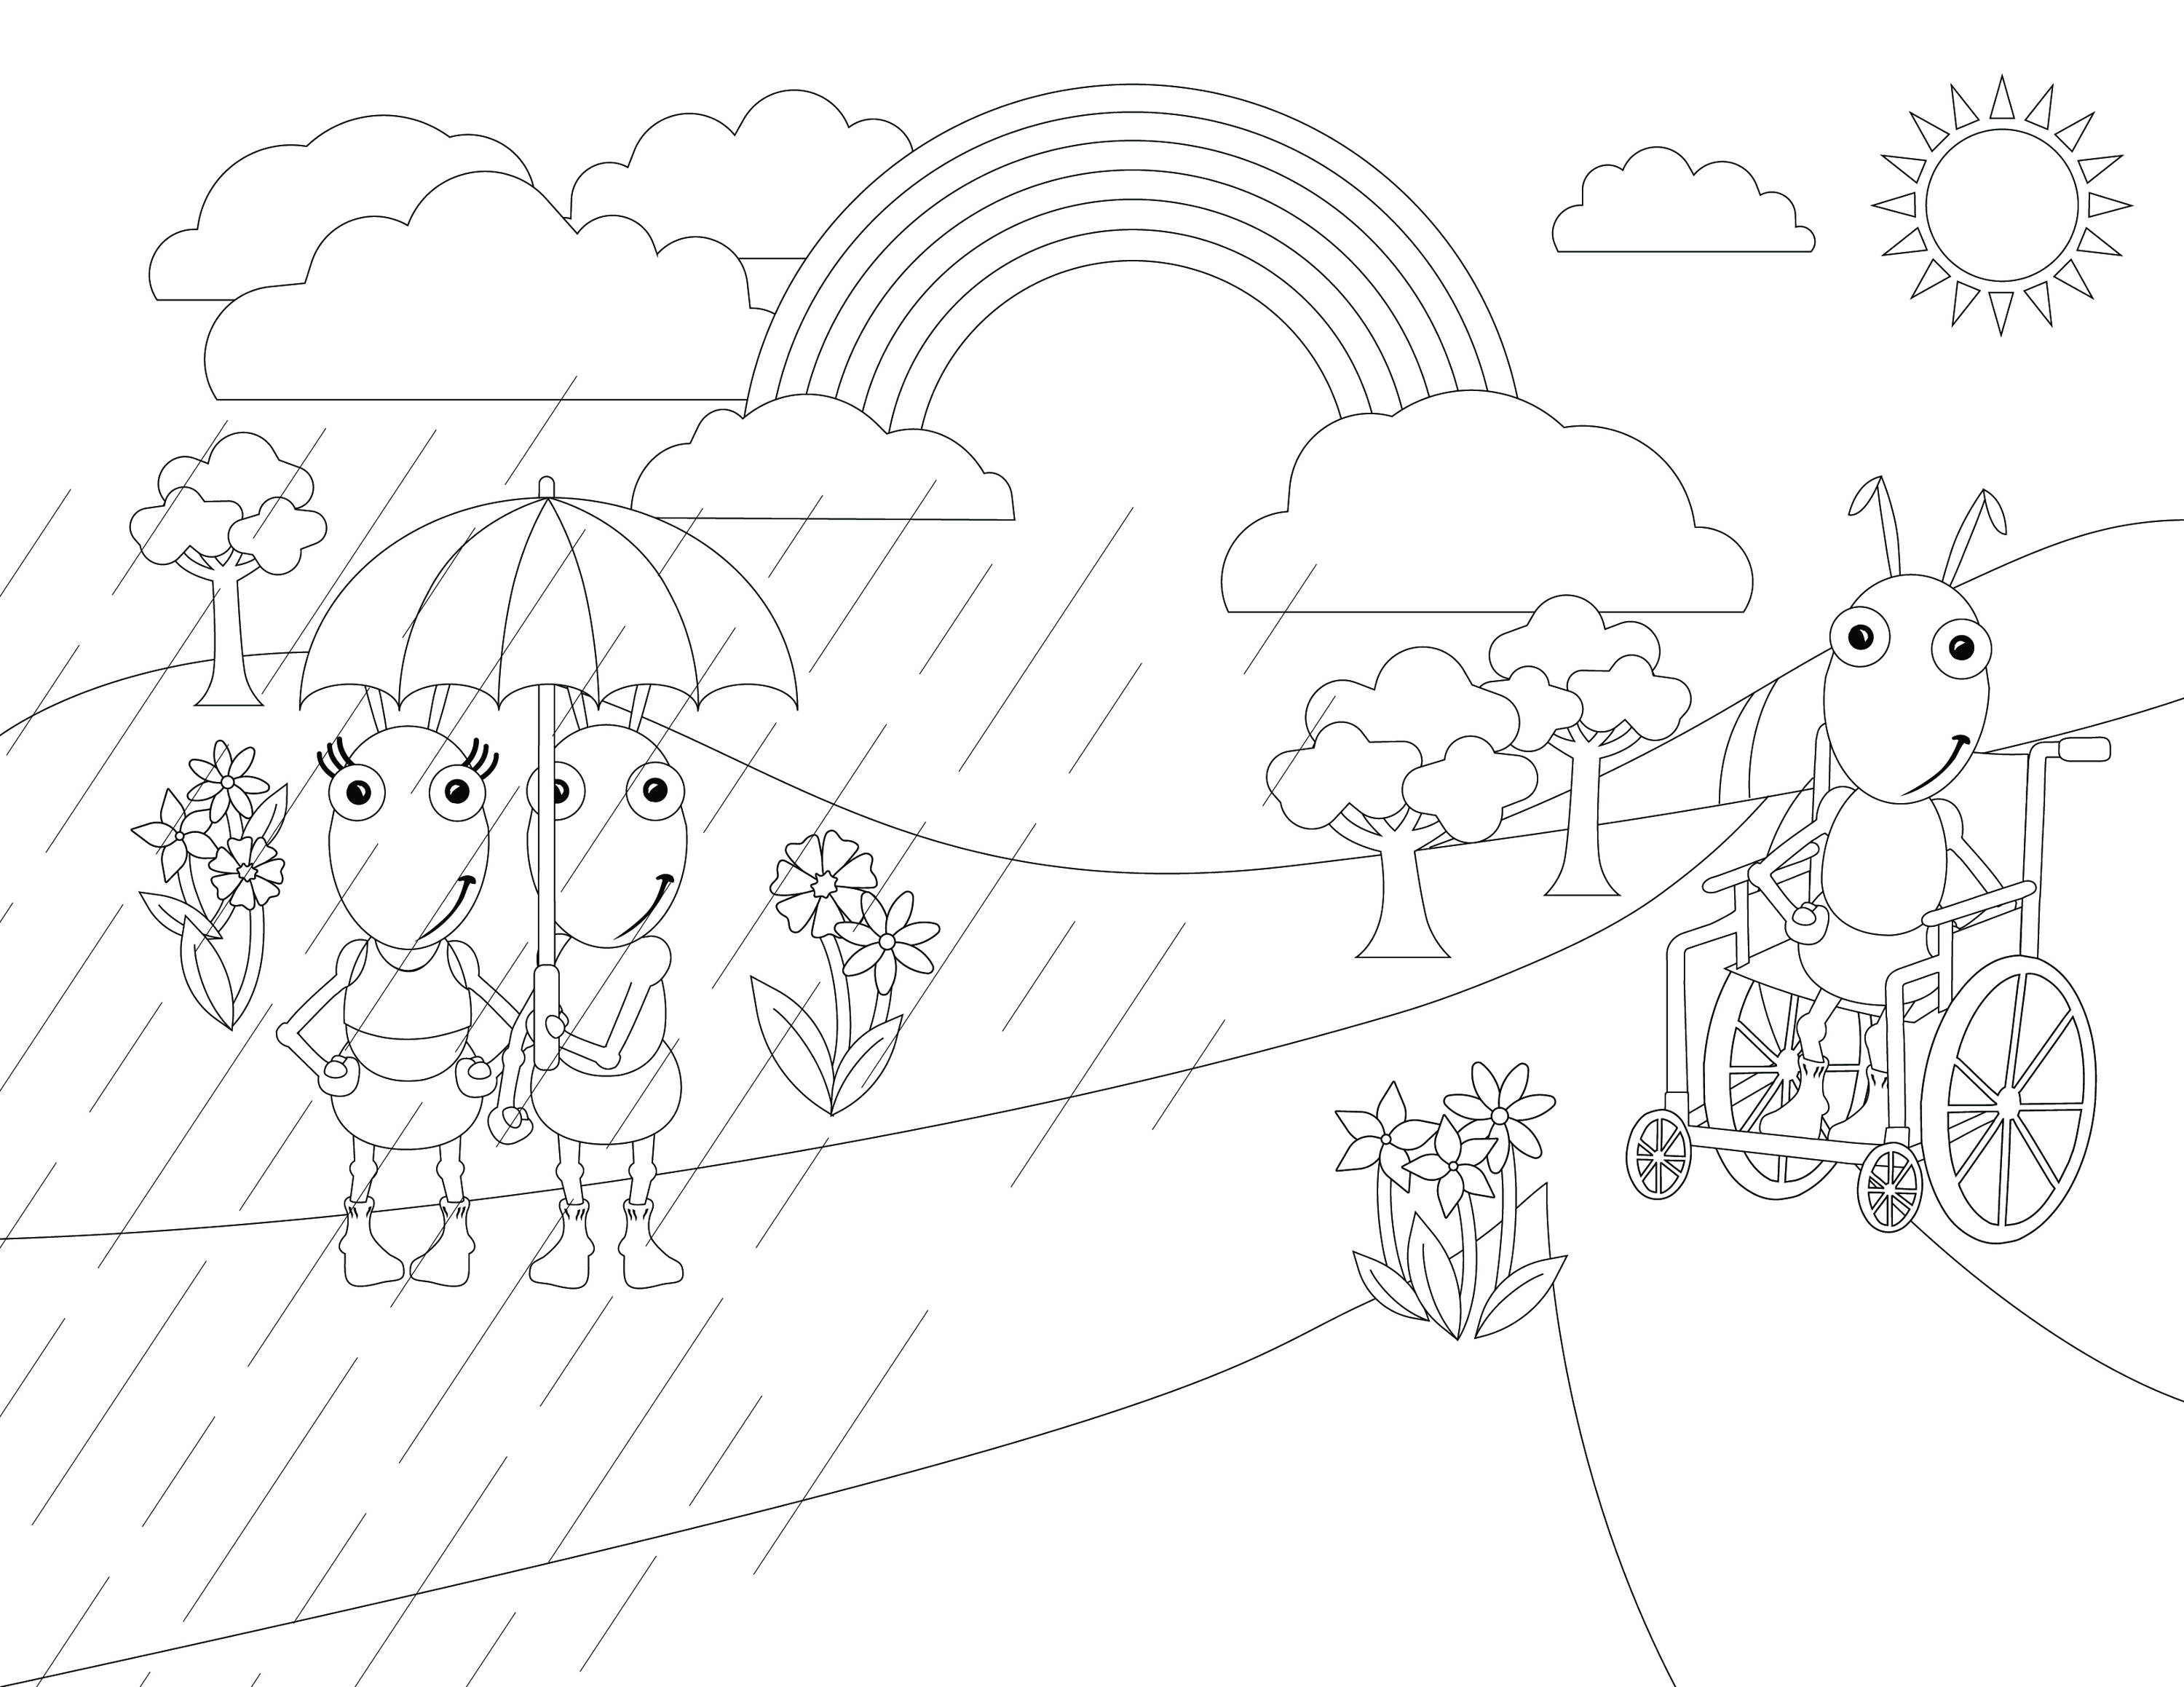 Rainy Day coloring page